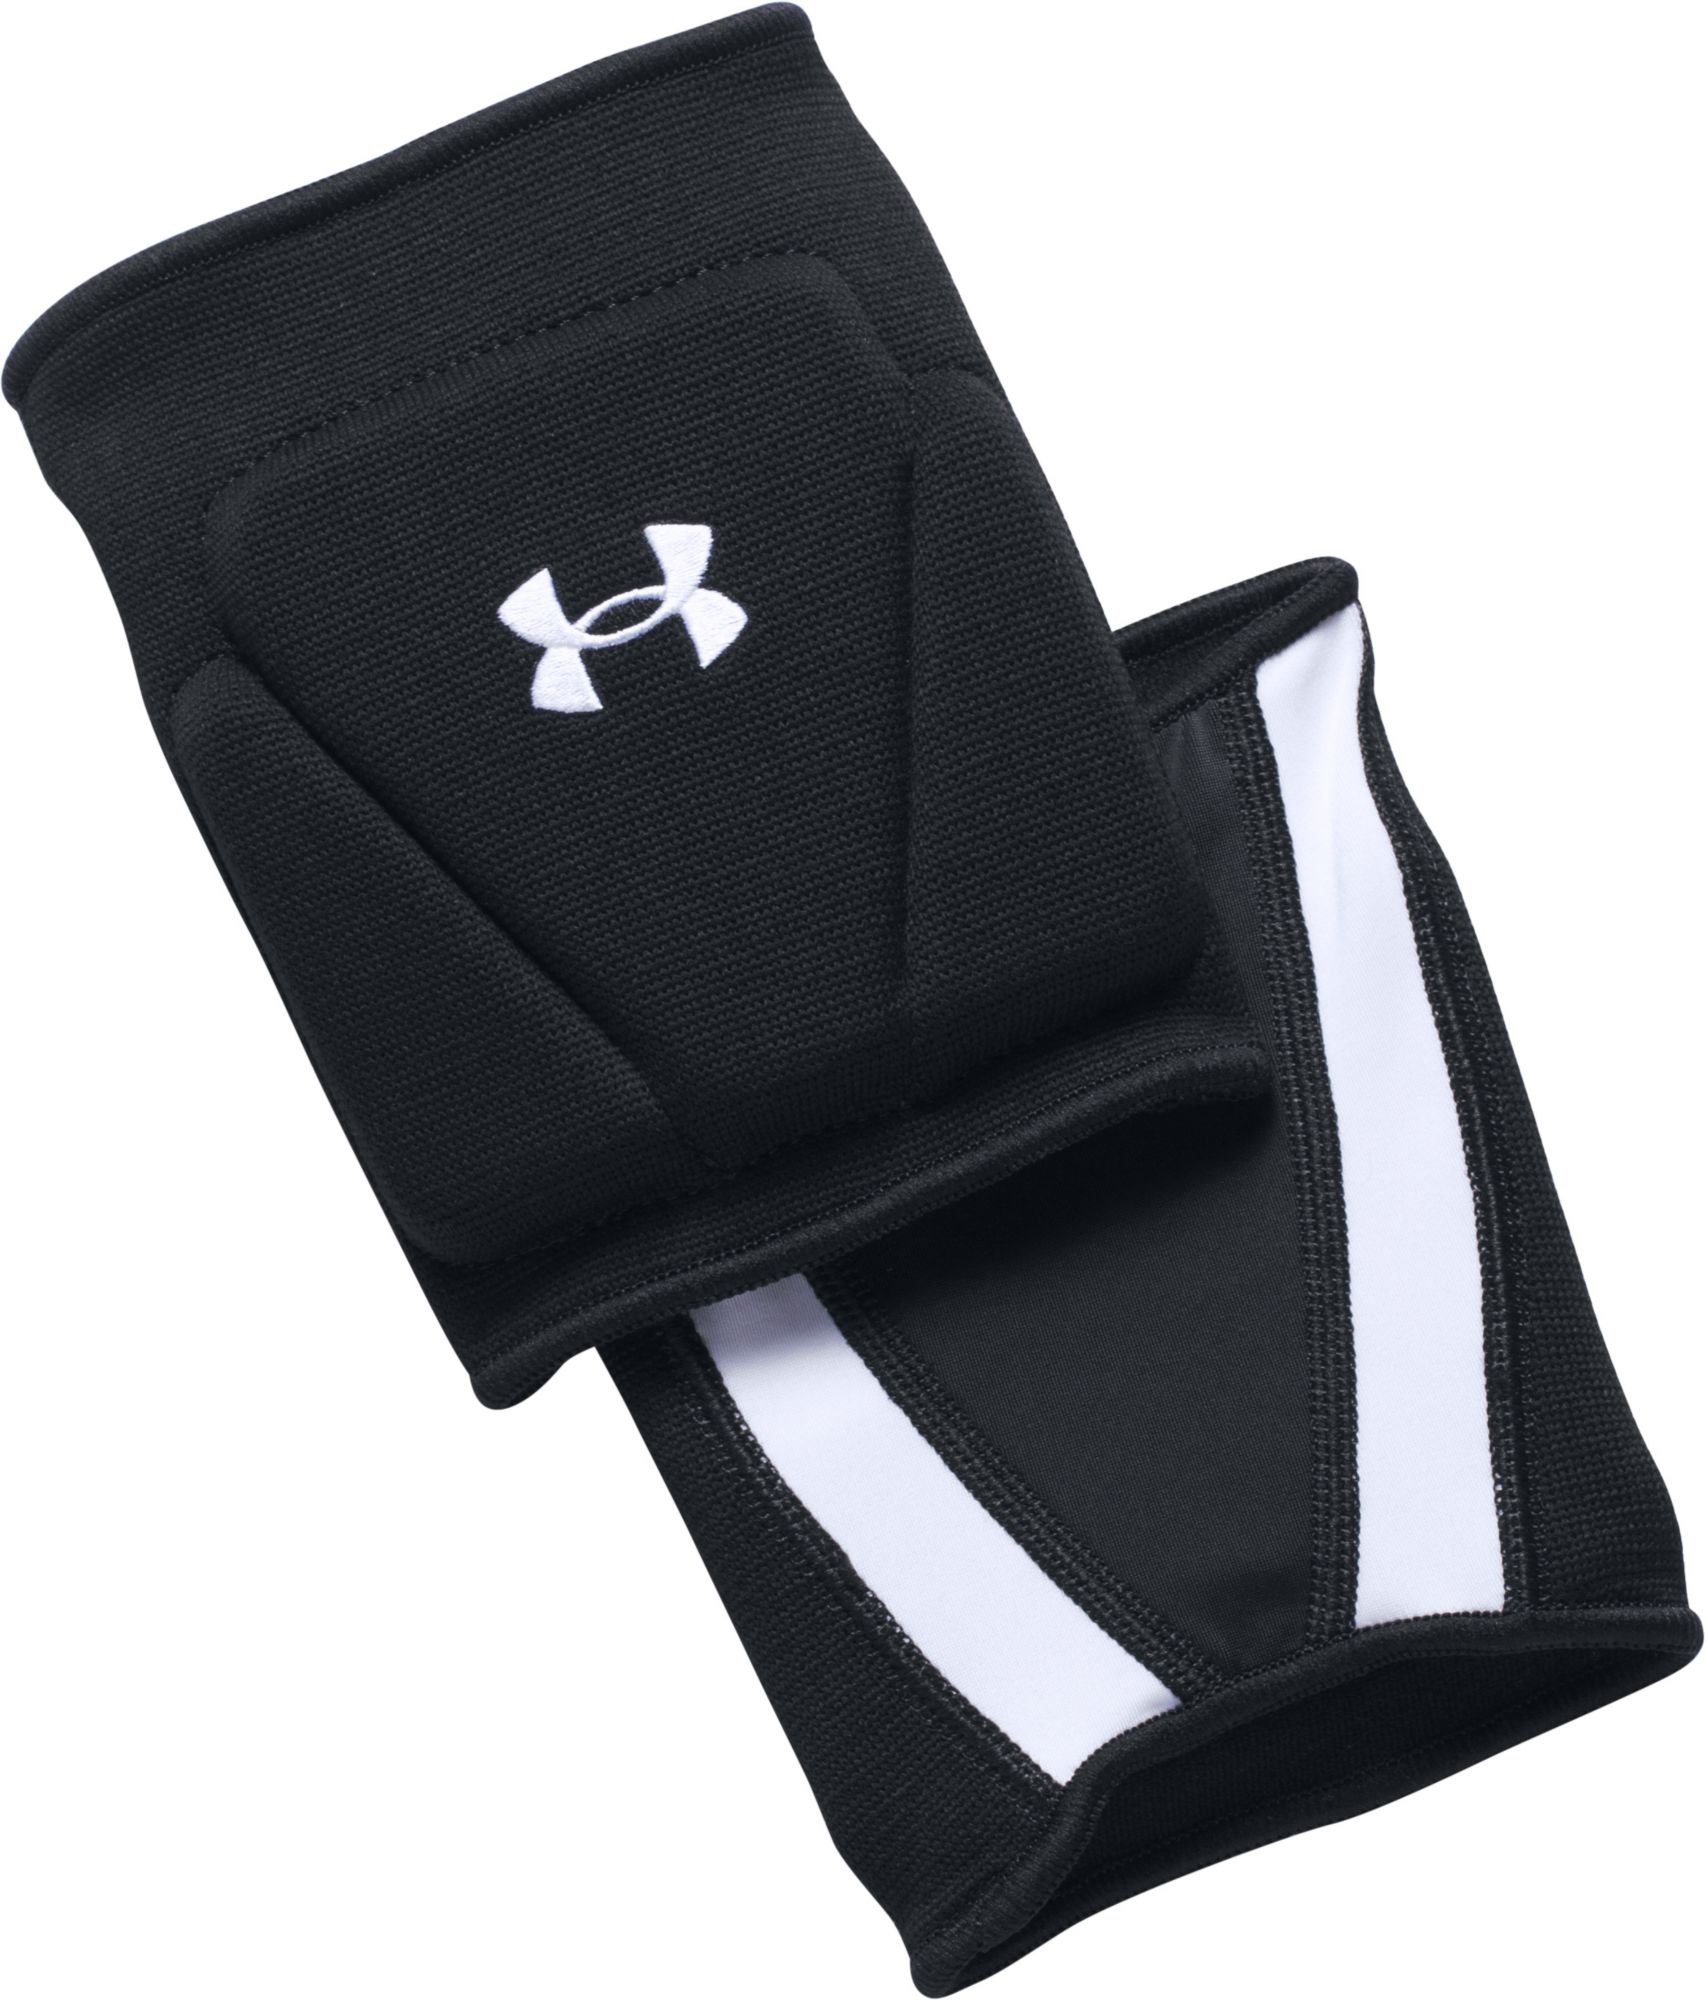 Strive 2.0 Volleyball Knee Pads 